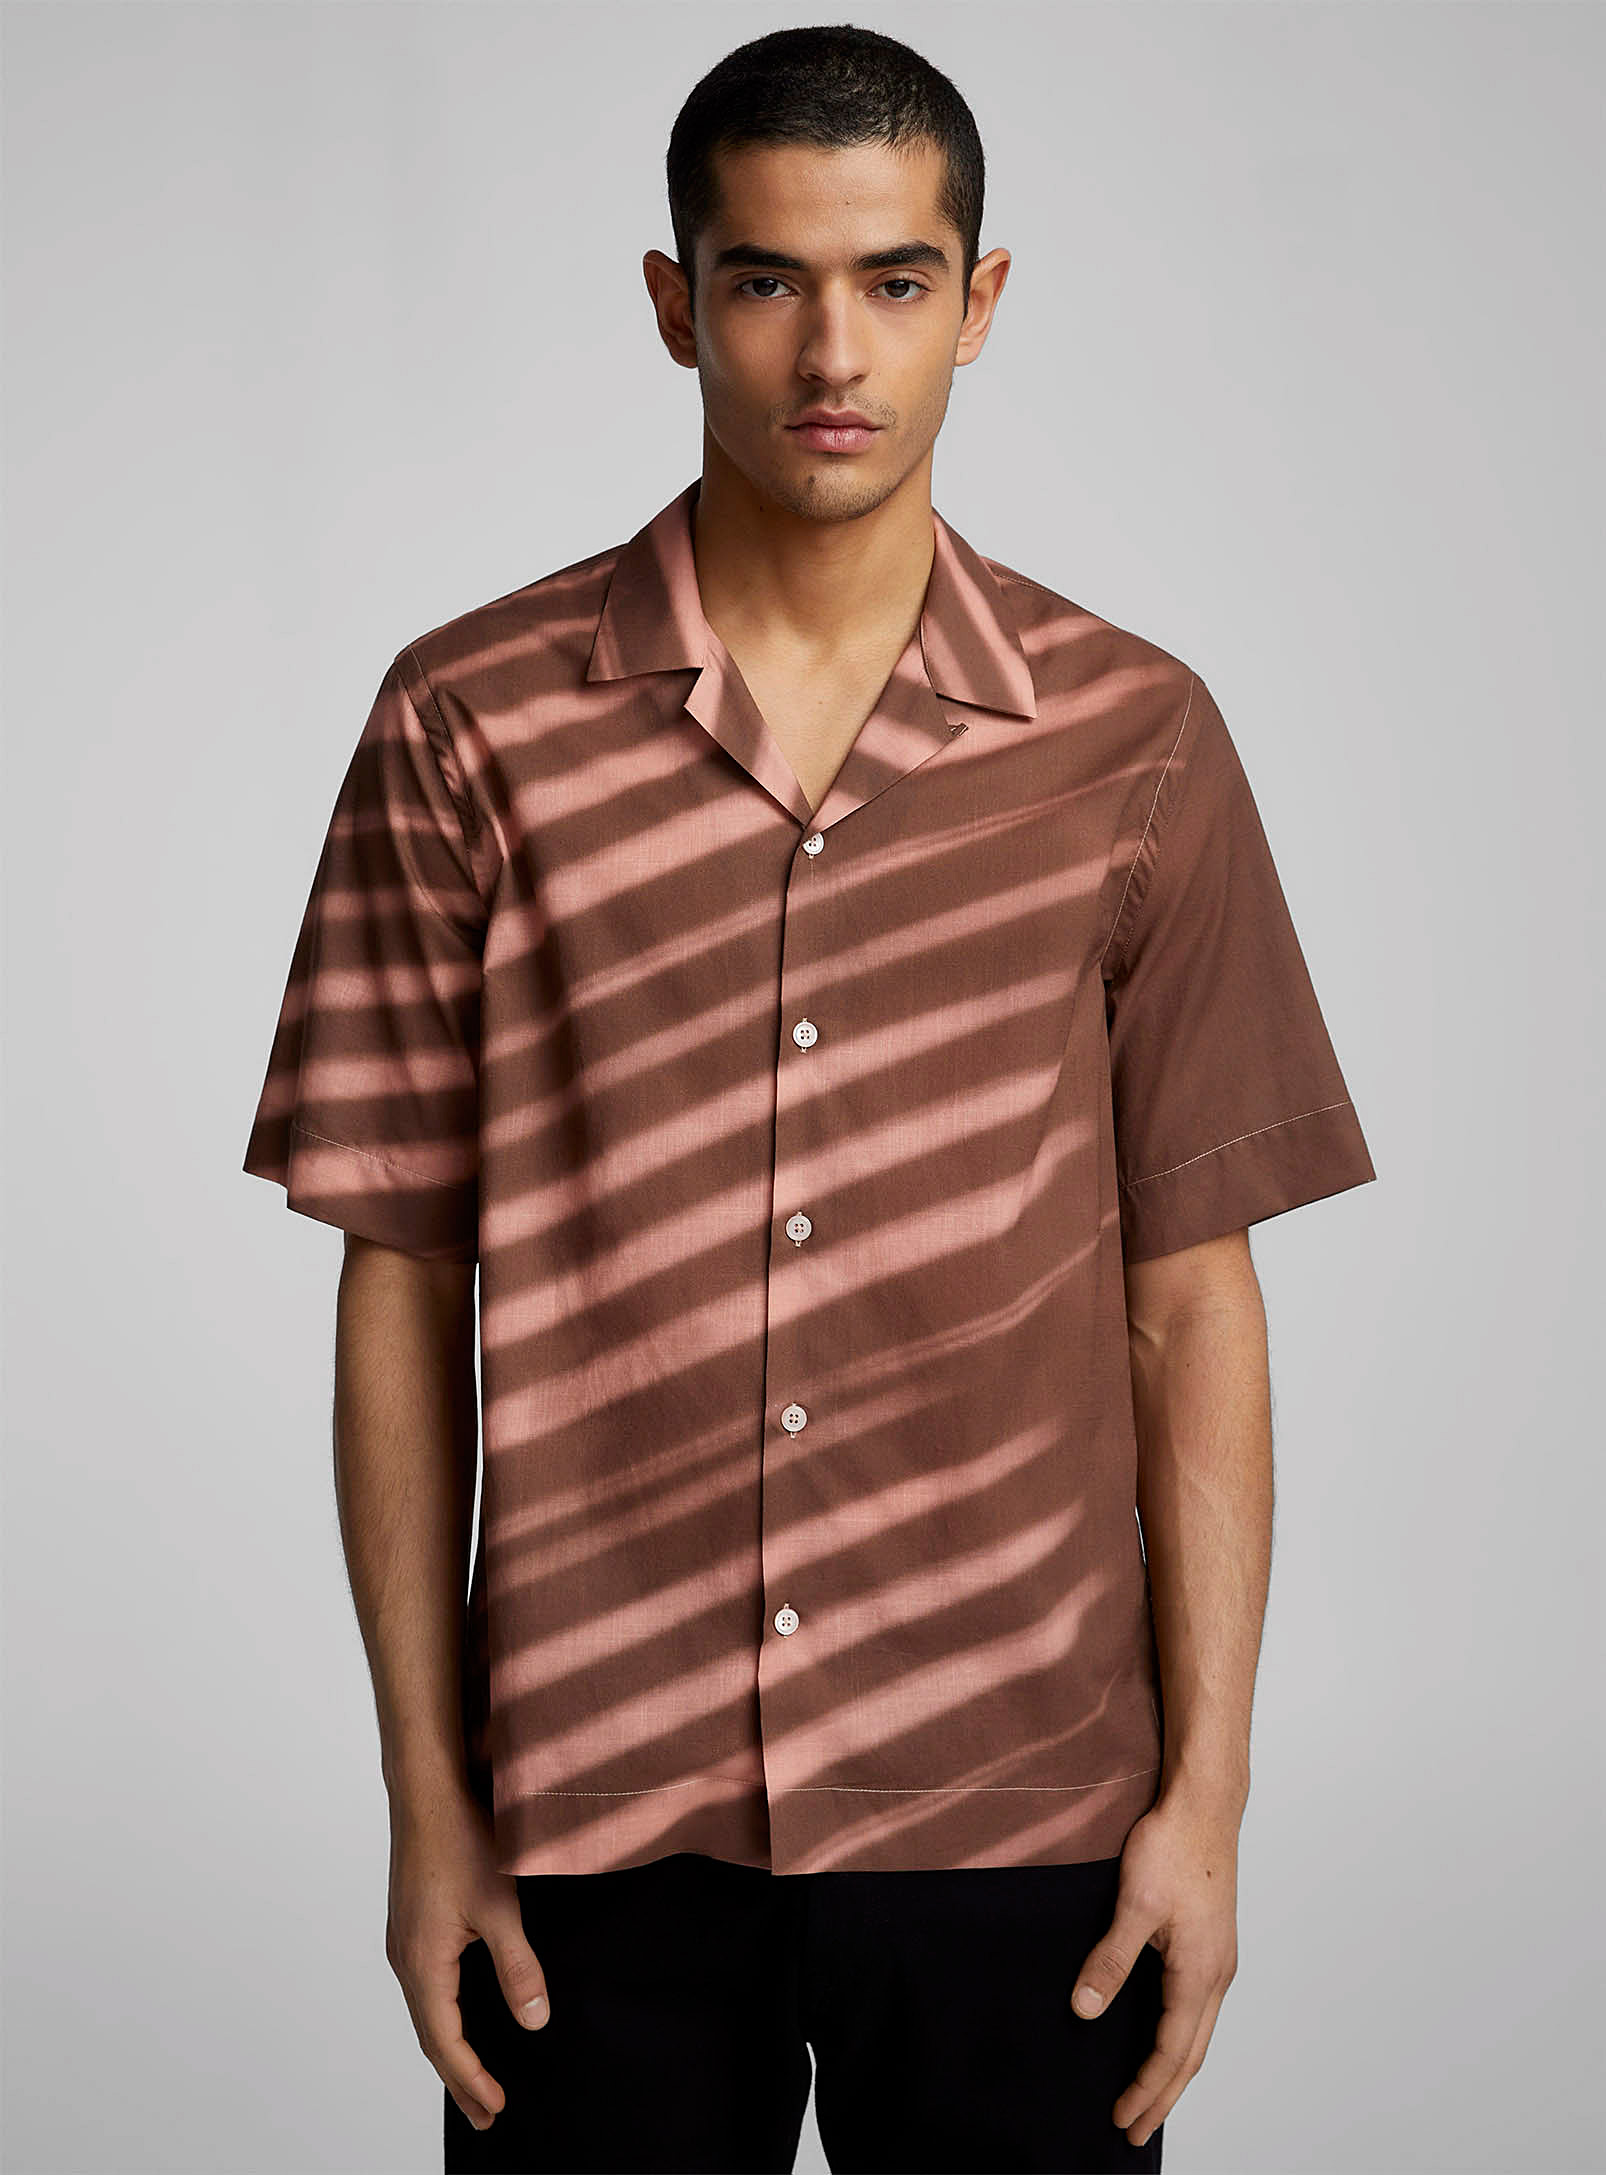 Paul Smith Faded Stripes Shirt In Patterned Brown